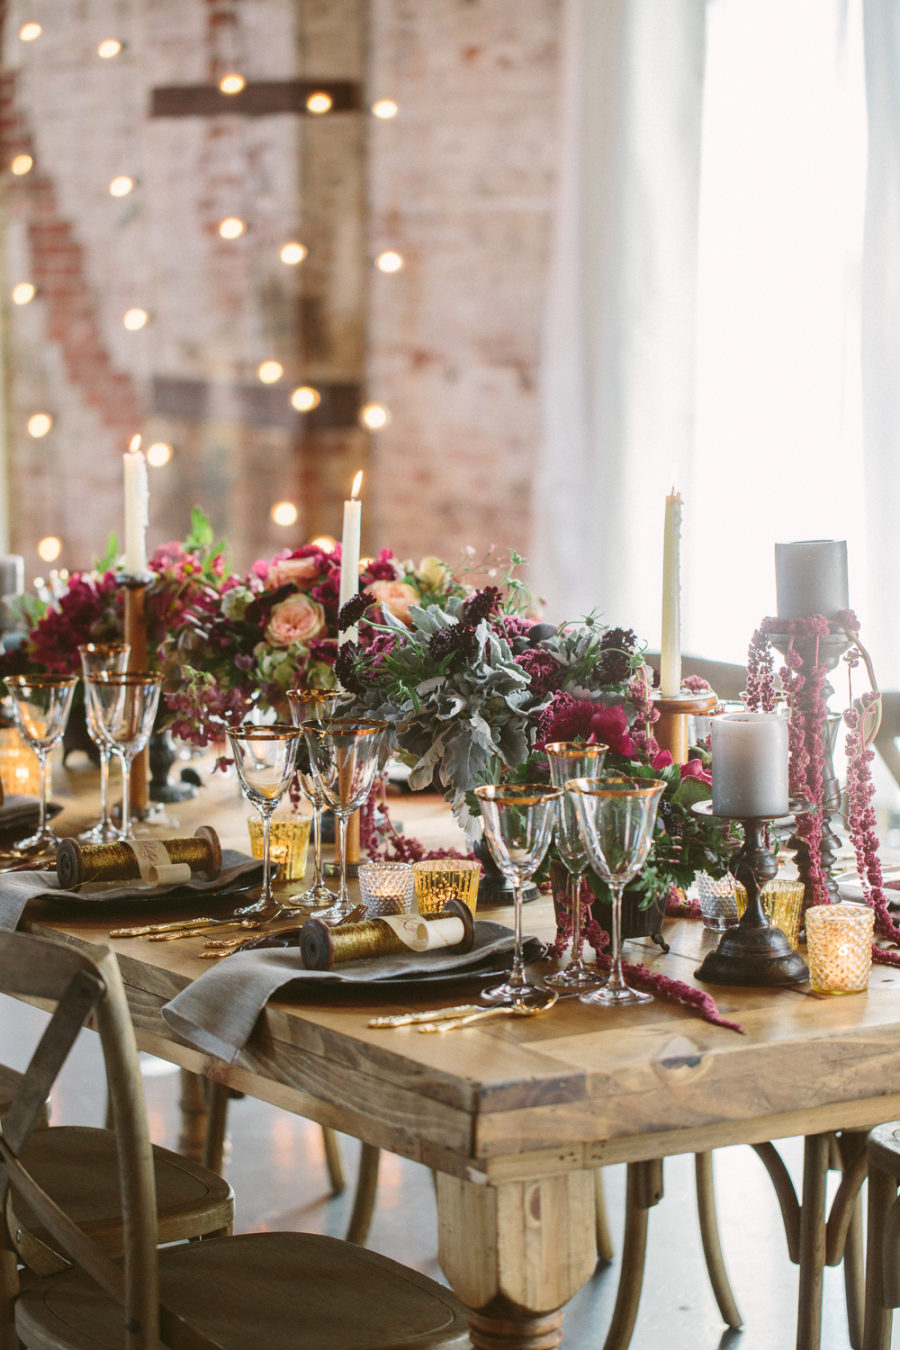 A lush and moody Sleeping Beauty wedding tablescape with moody florals, pale greenery, candles, gold rimmed glasses